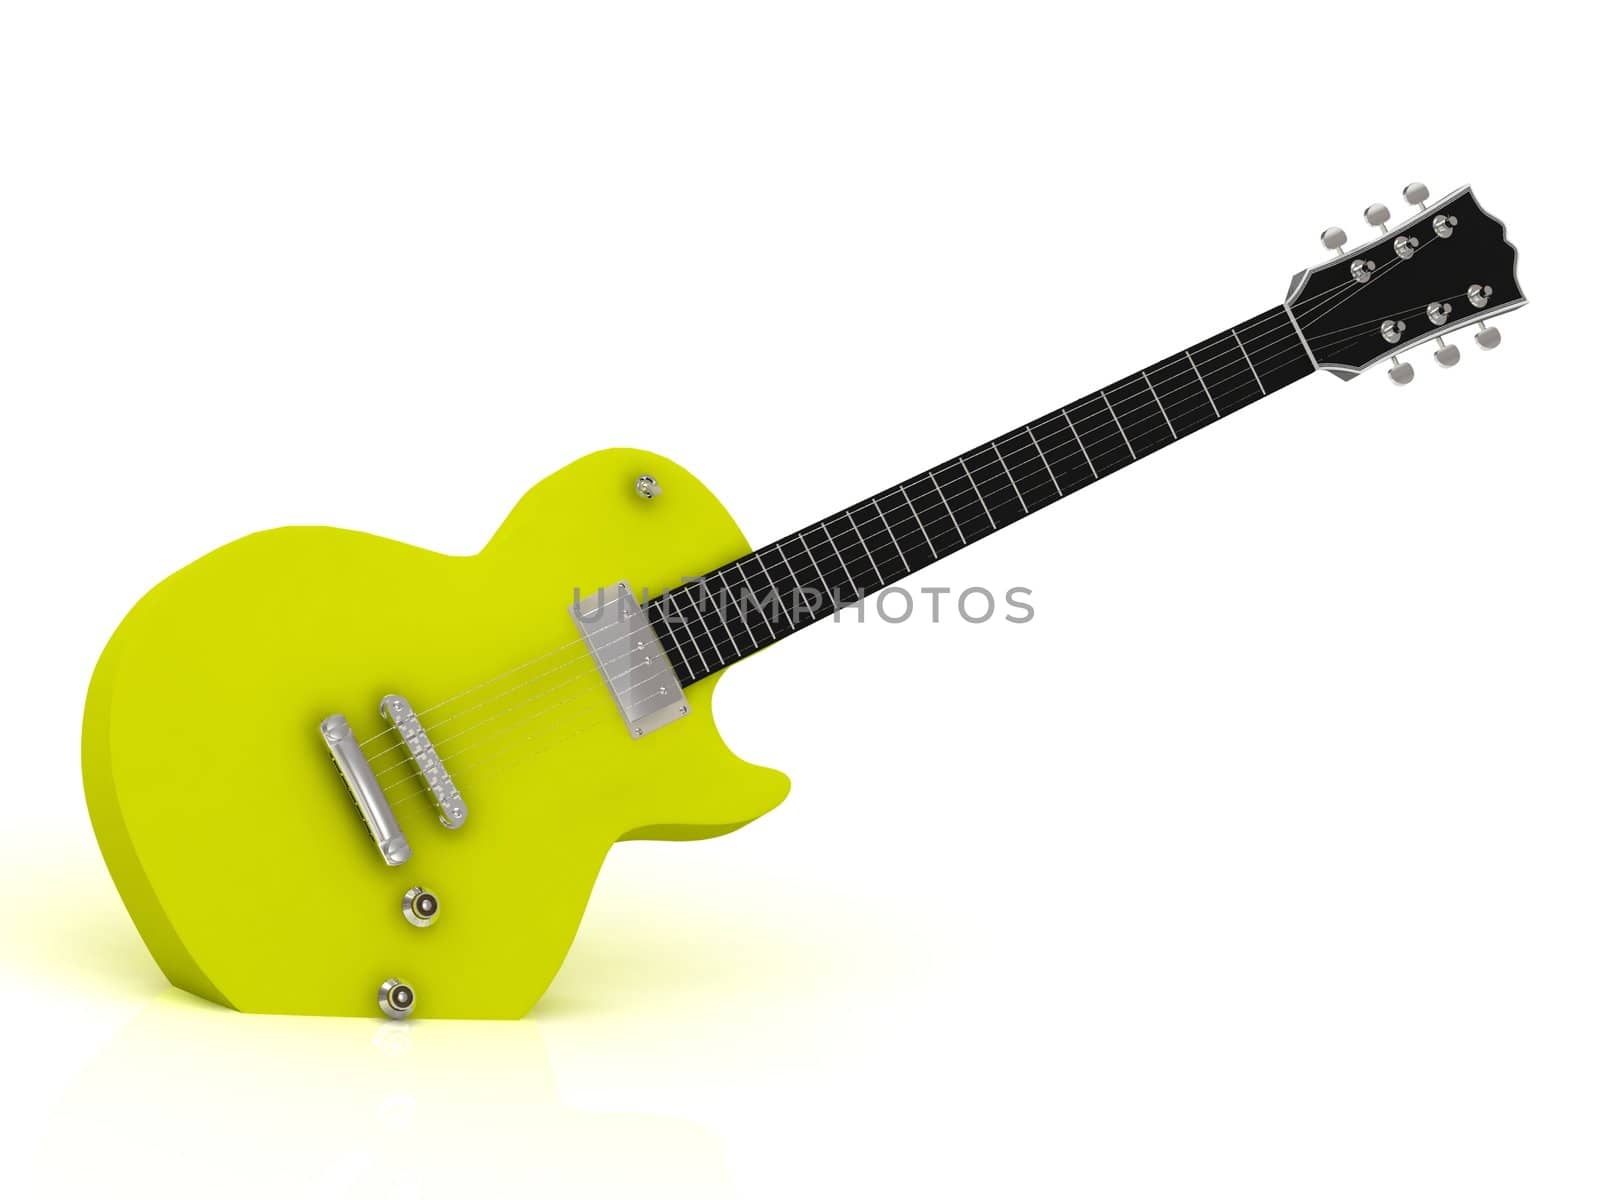 Yellow electric guitar with a dark neck on a white isolated background